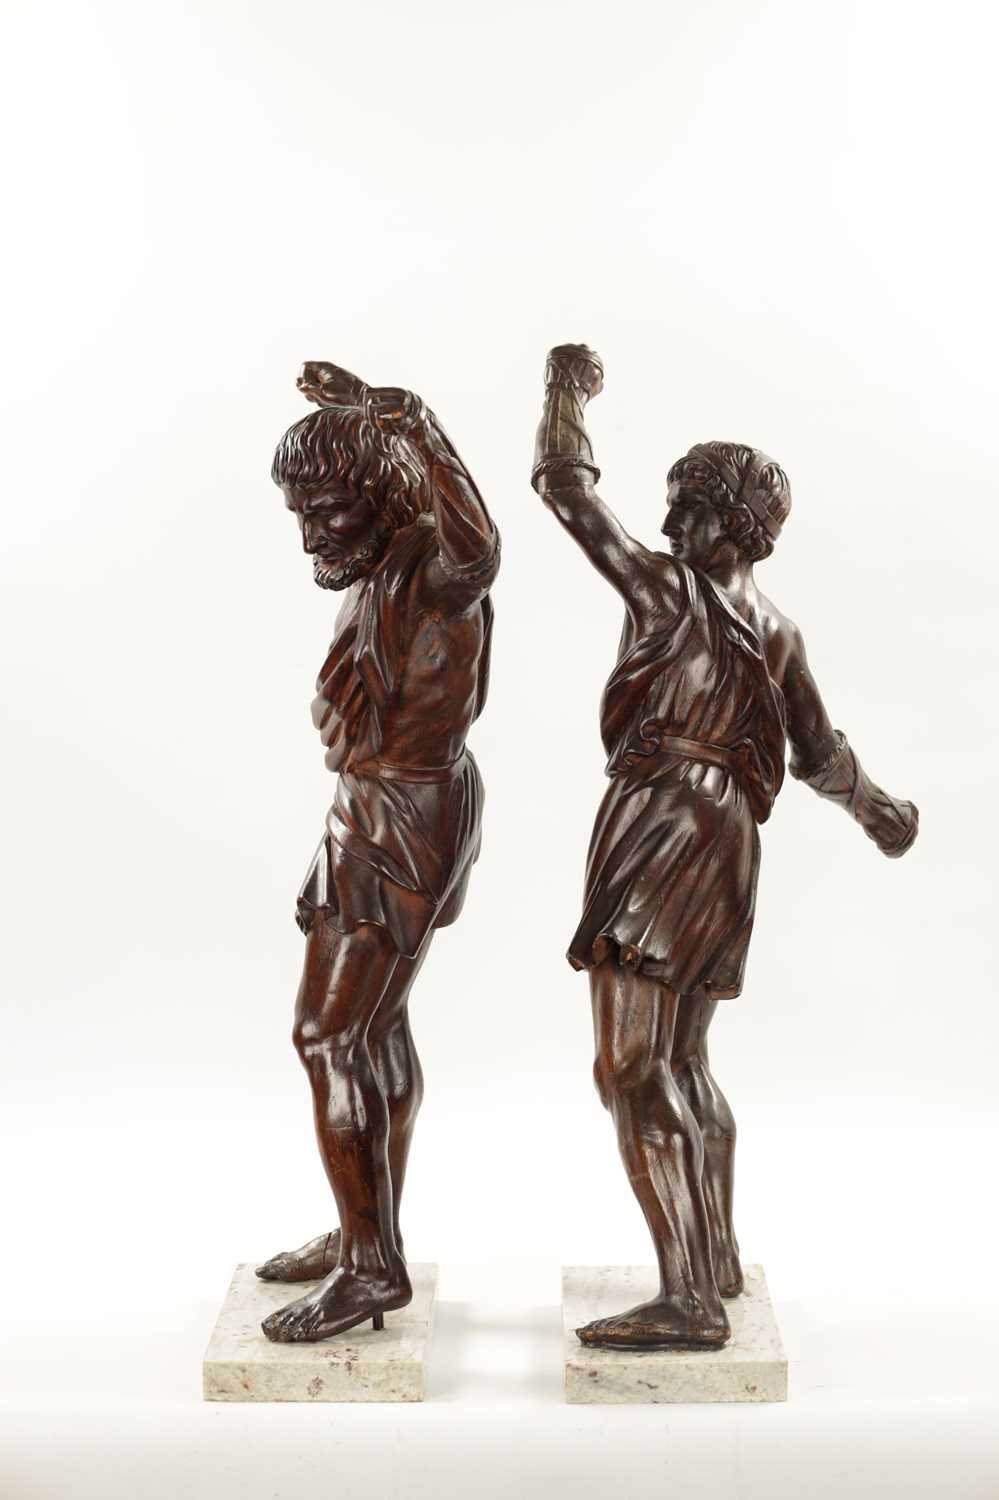 A PAIR OF GRAND TOUR CARVED WALNUT GLADIATORS AFTER THE BORGHESE BRONZE ROMAN FIGURES - Image 11 of 11